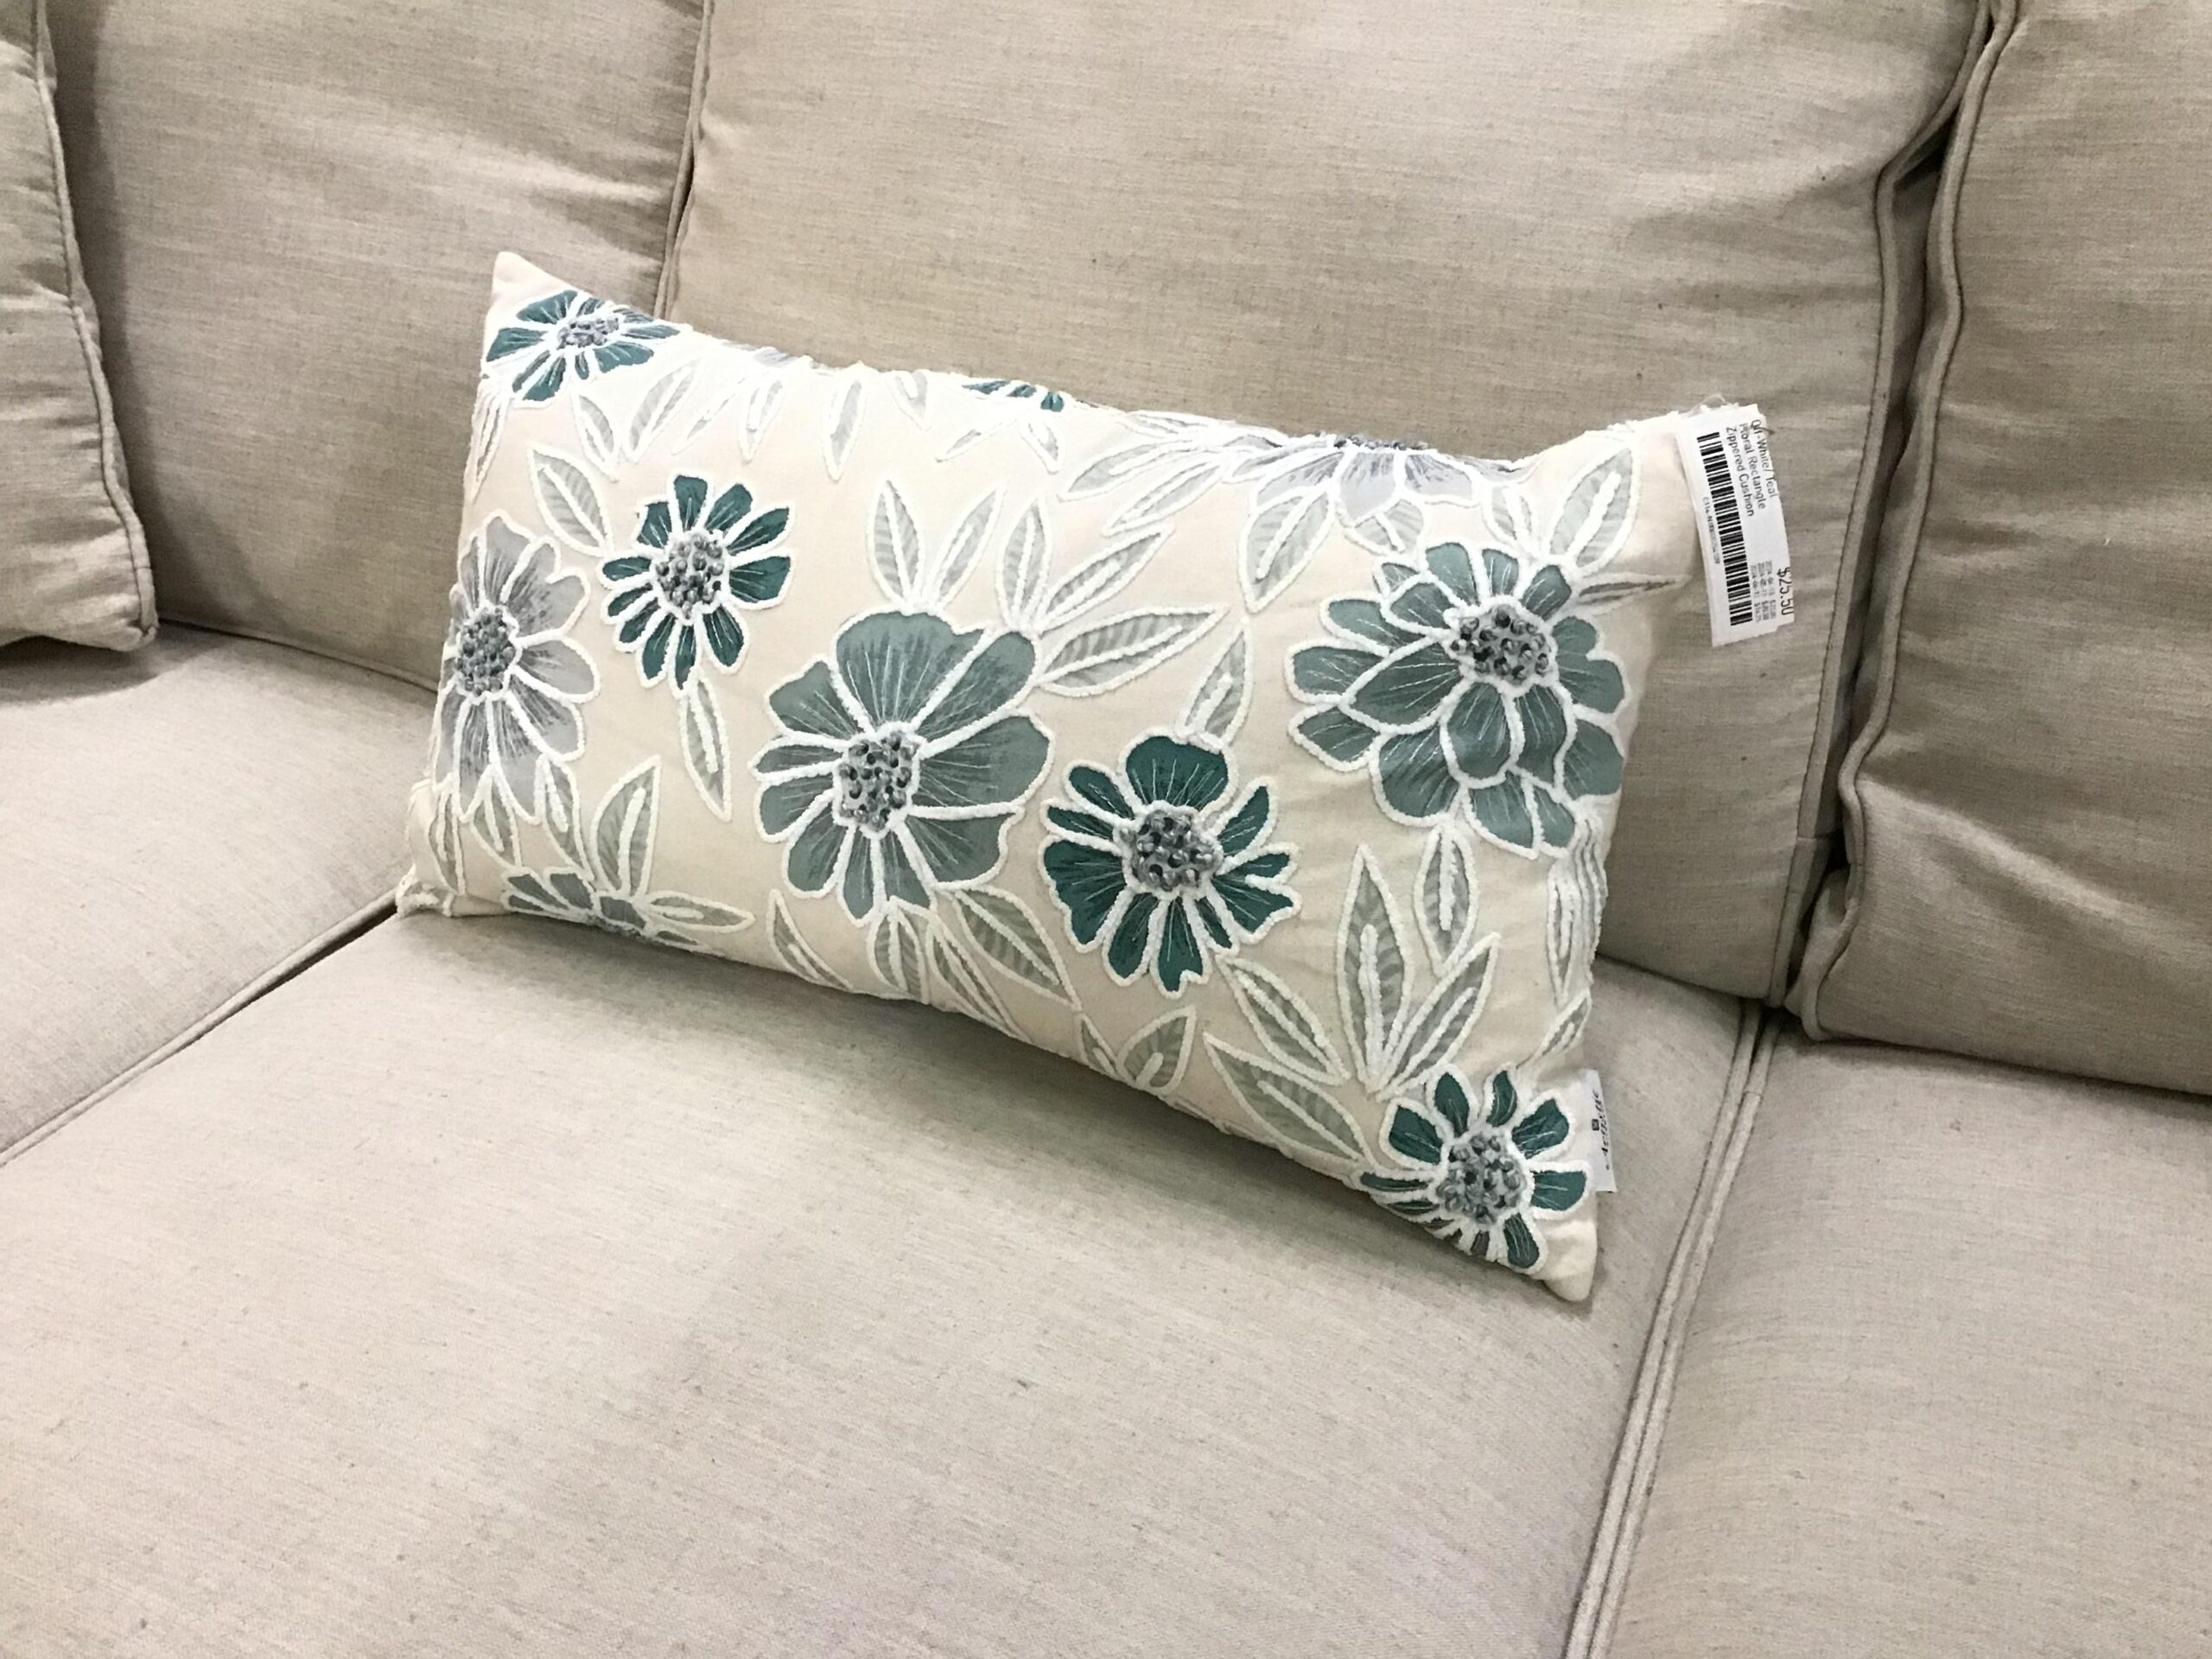 Off-White/ Teal Floral Rectangle Zippered Cushion